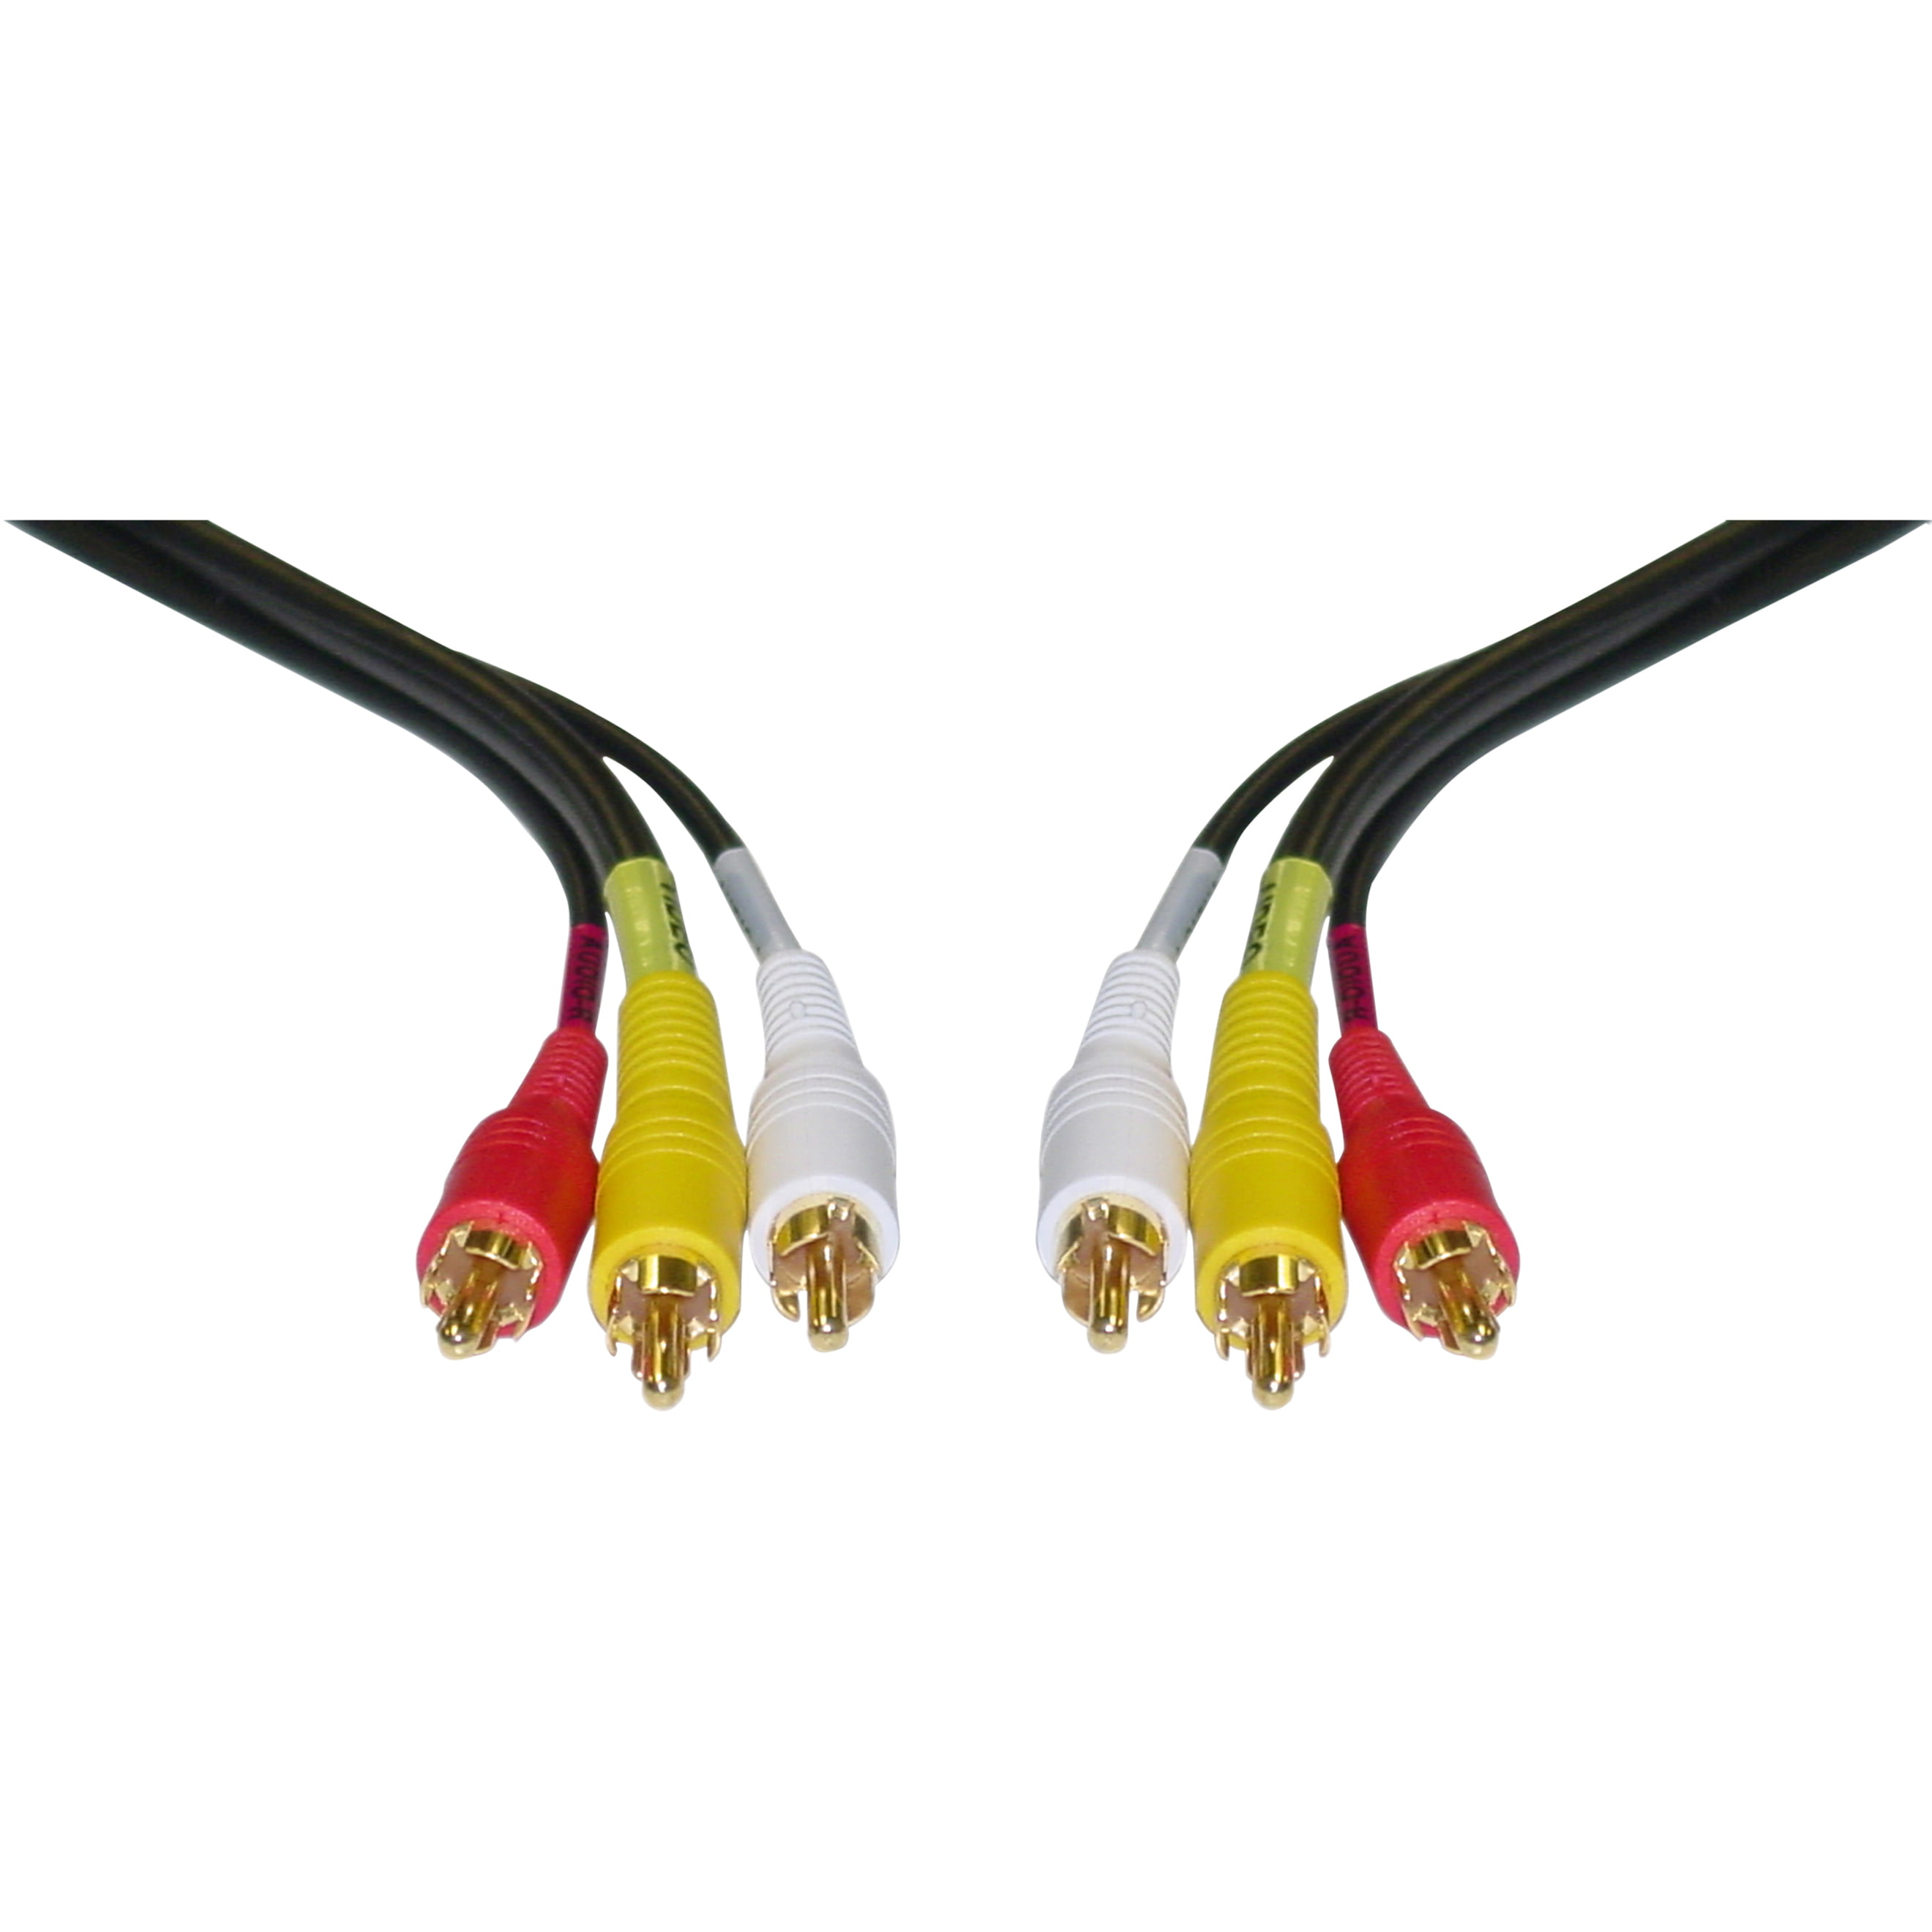 Gold Plated 4 Pin Connectors Belkin Belkin Male S-Video Cable for PC/TV/DVD/VCR 25 ft 